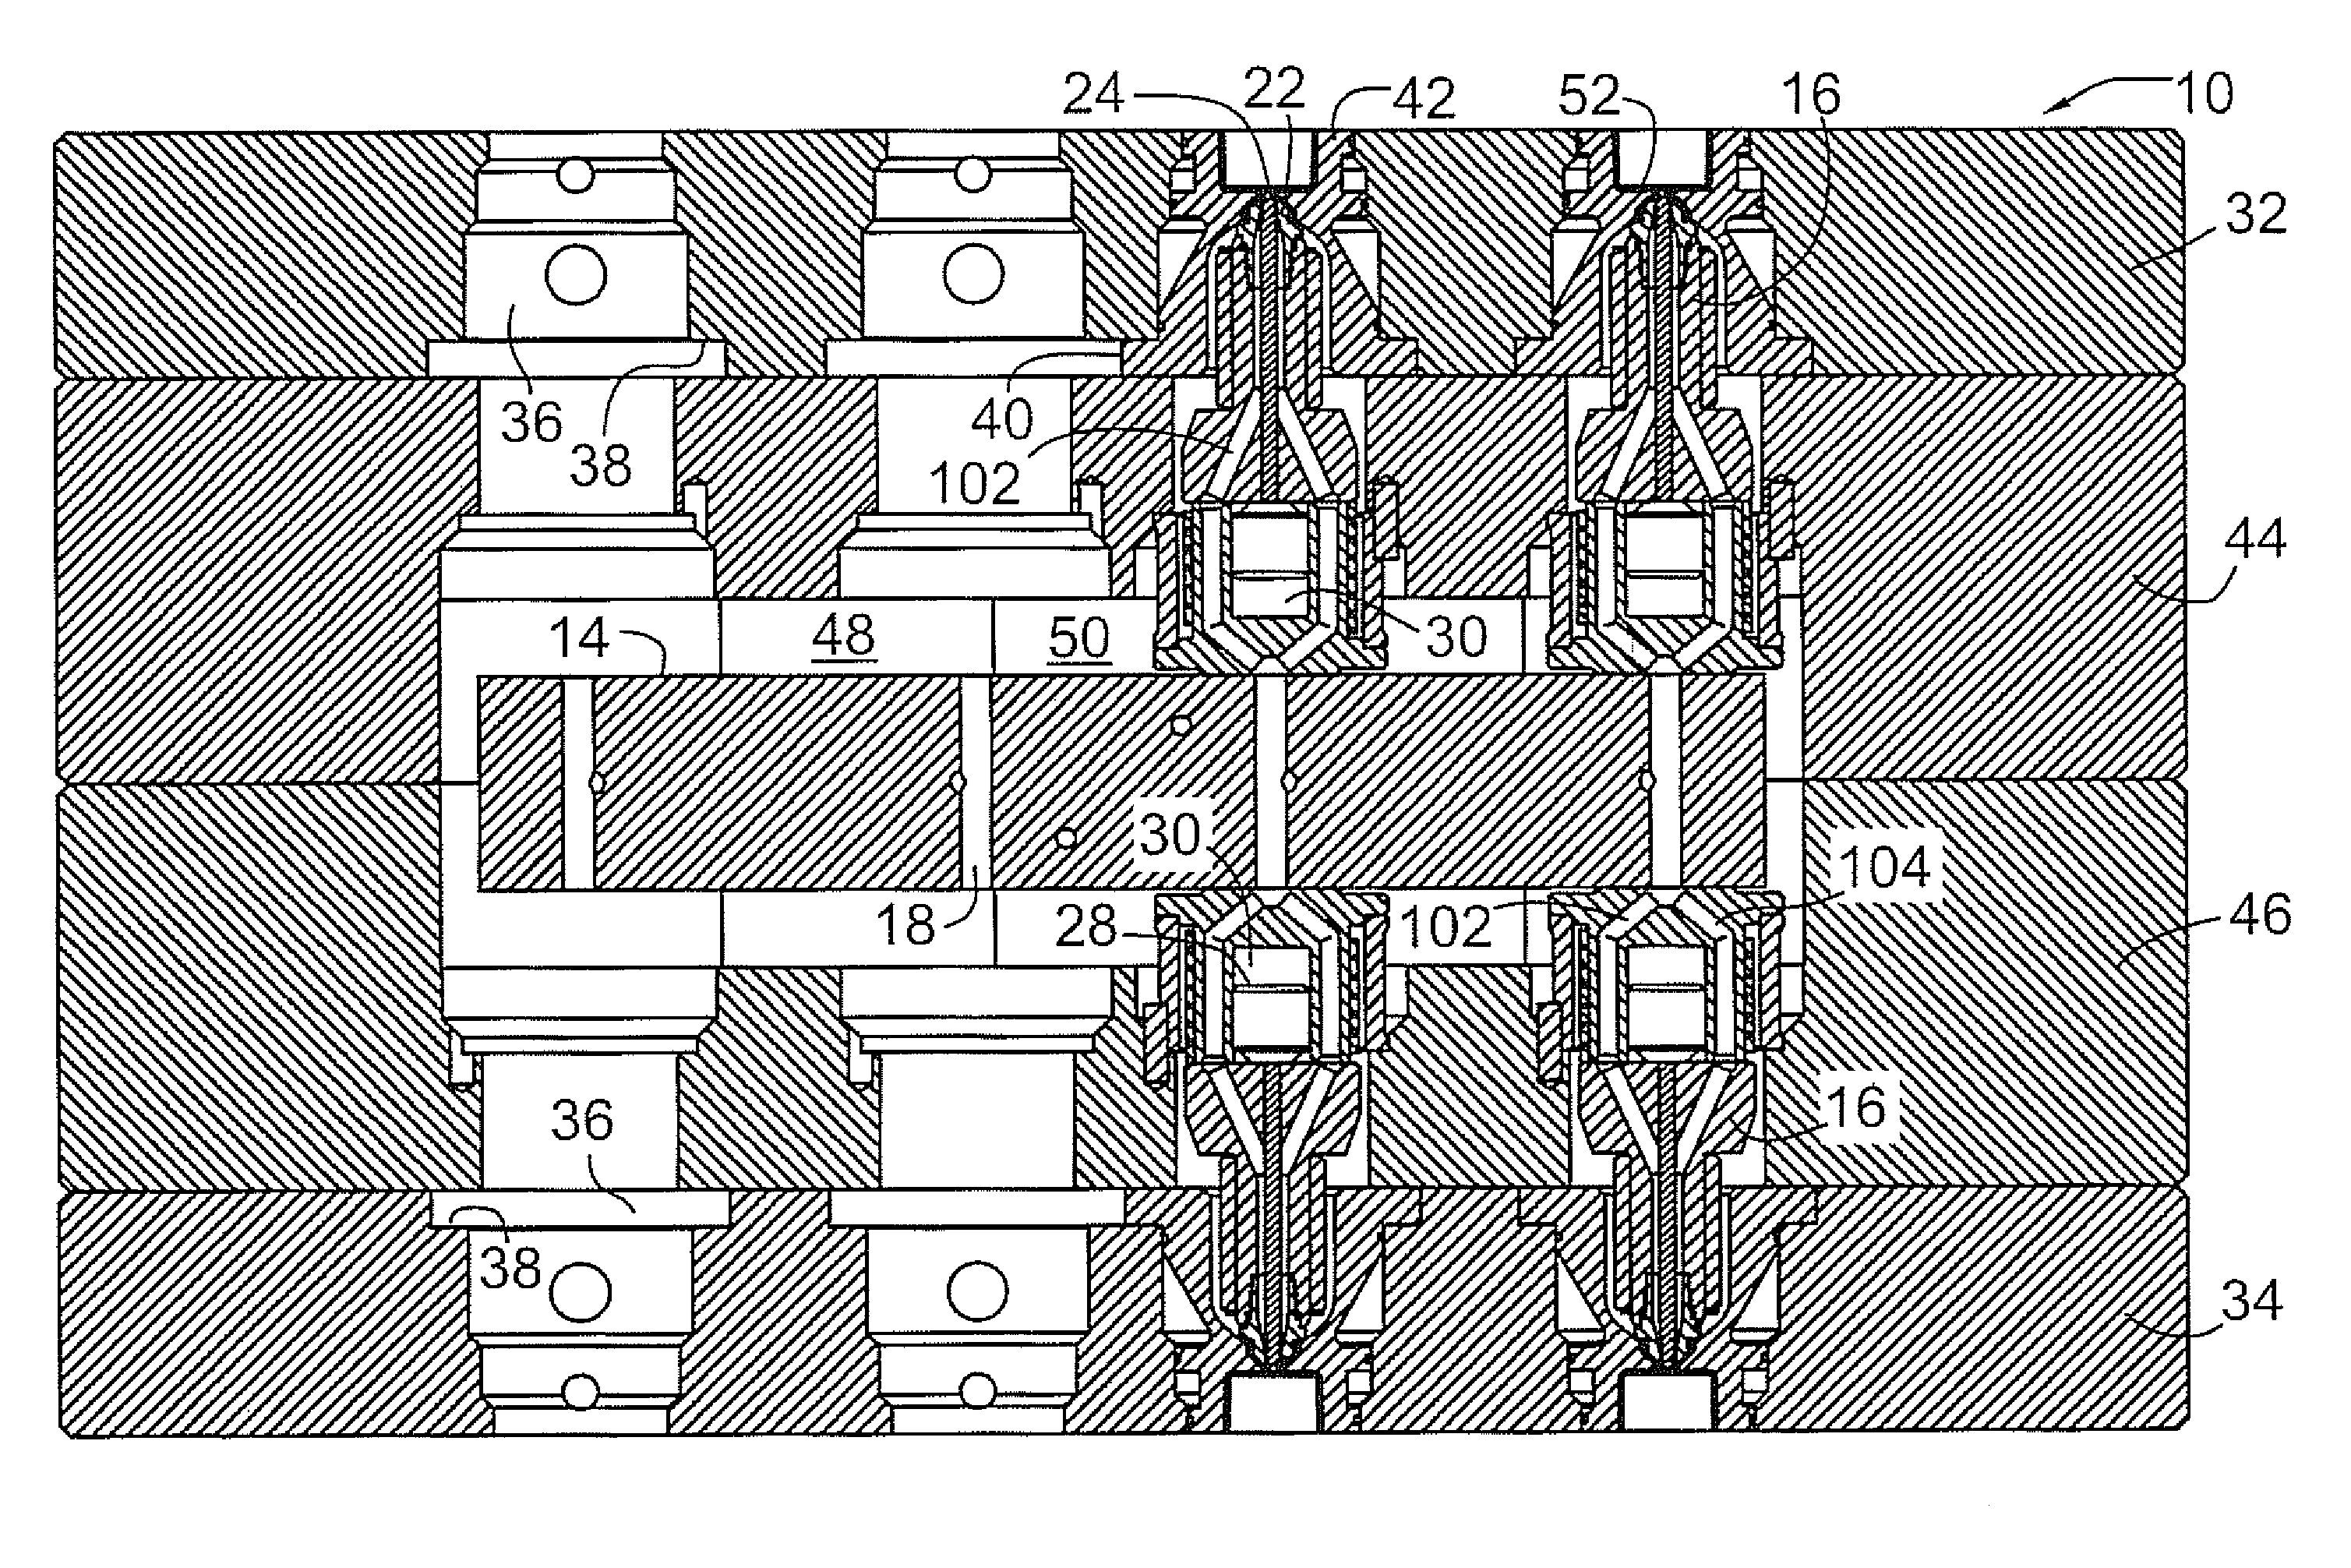 Injection apparatus for injection molding of thermoplastic parts